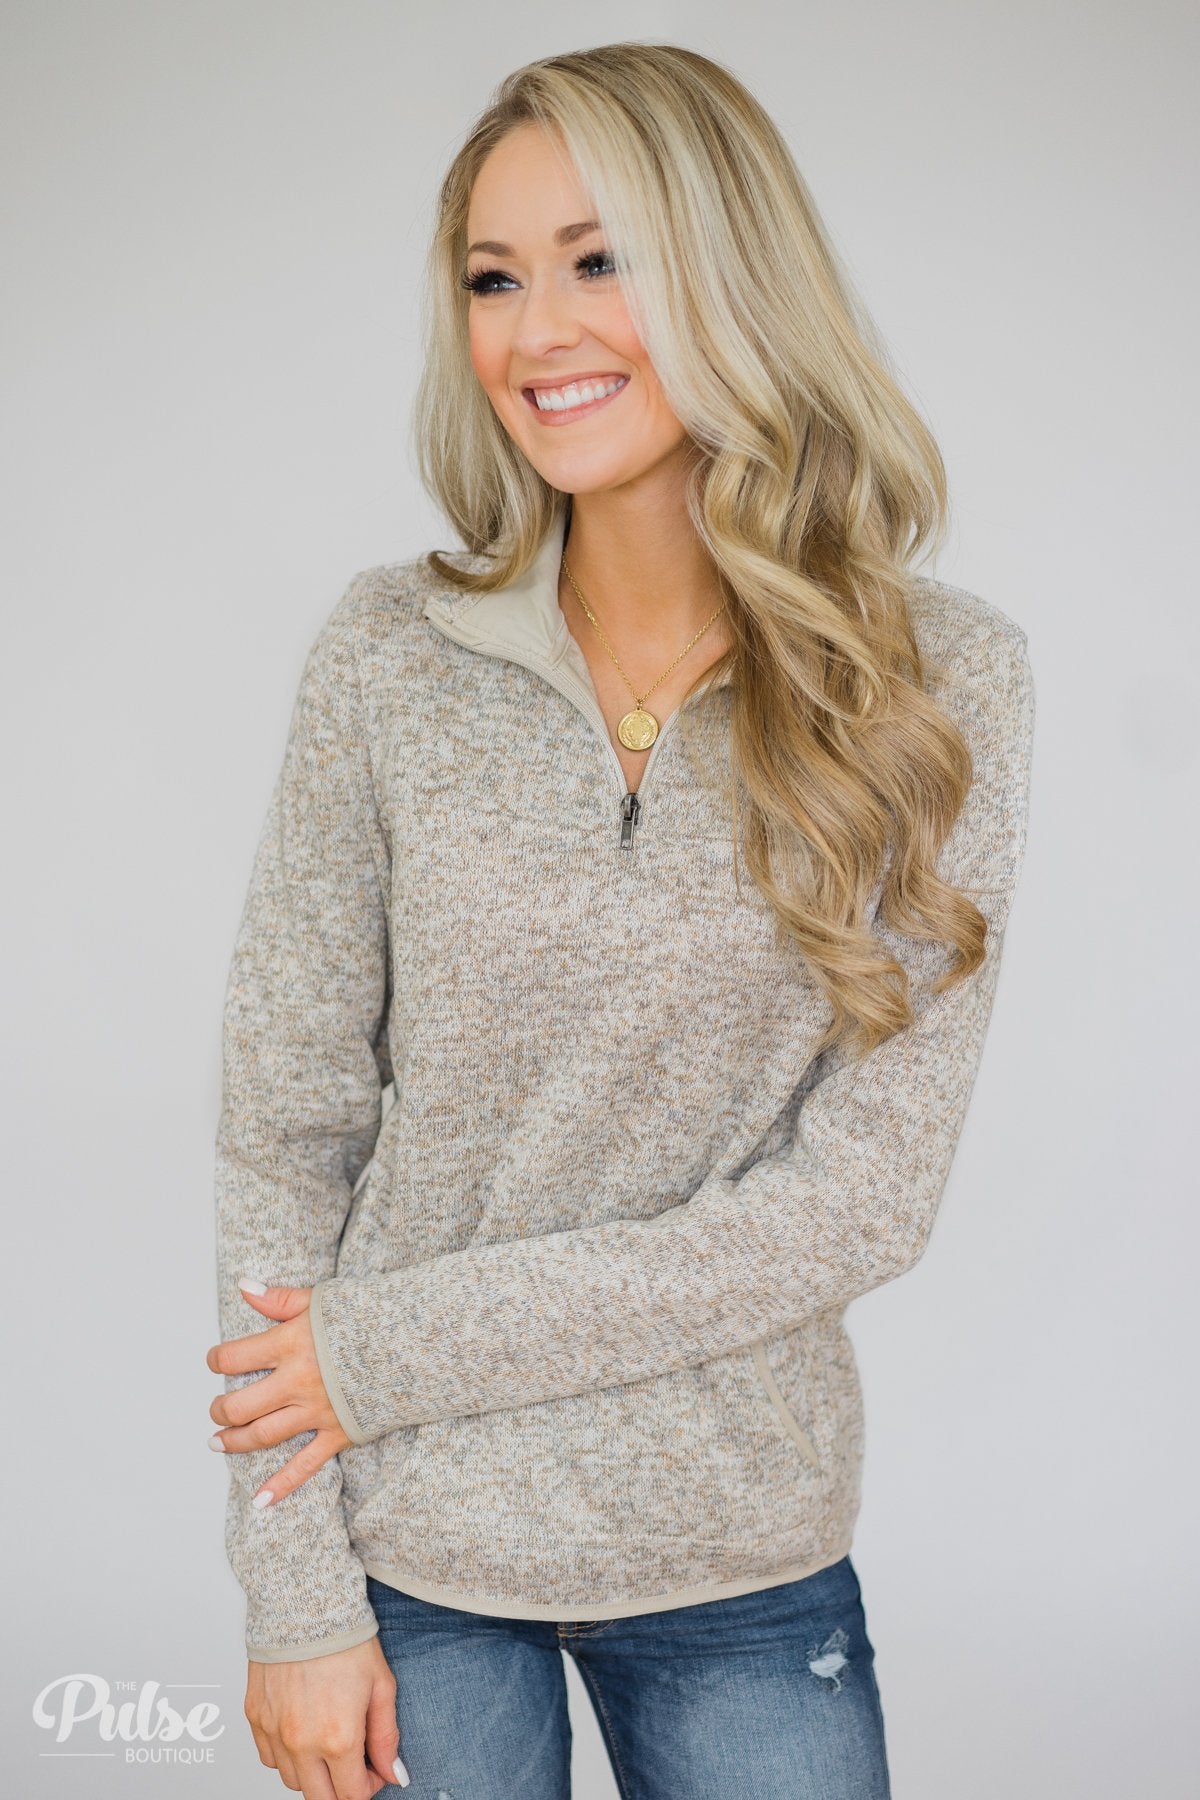 Thread & Supply Pullover Quarter Zip- Heather Oatmeal – The Pulse Boutique